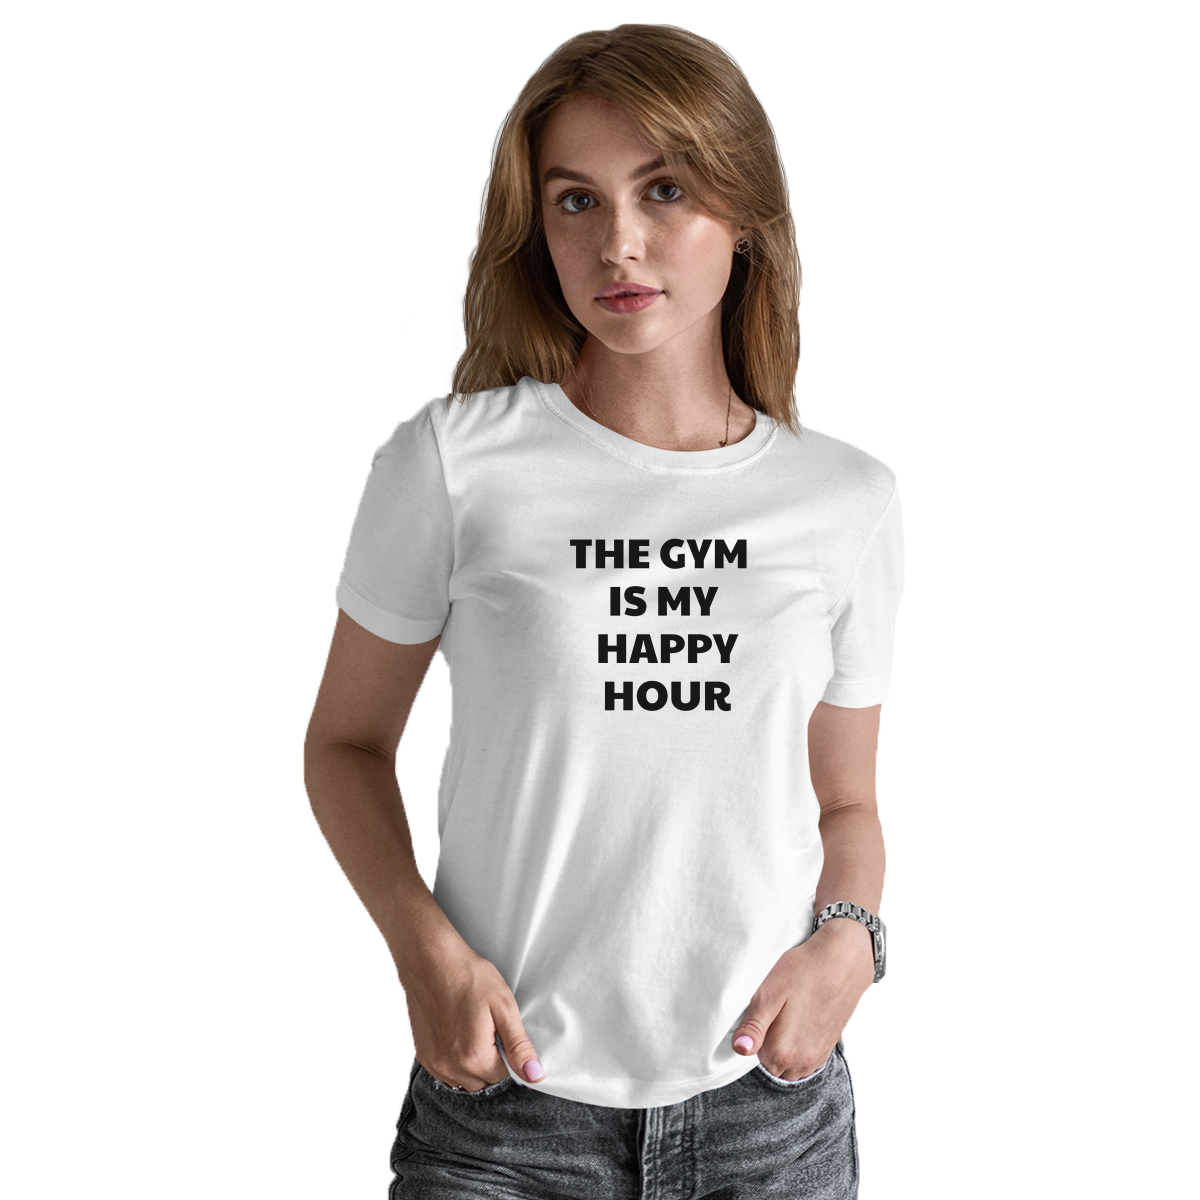 The Gym is my happy hour Women's T-shirt | White